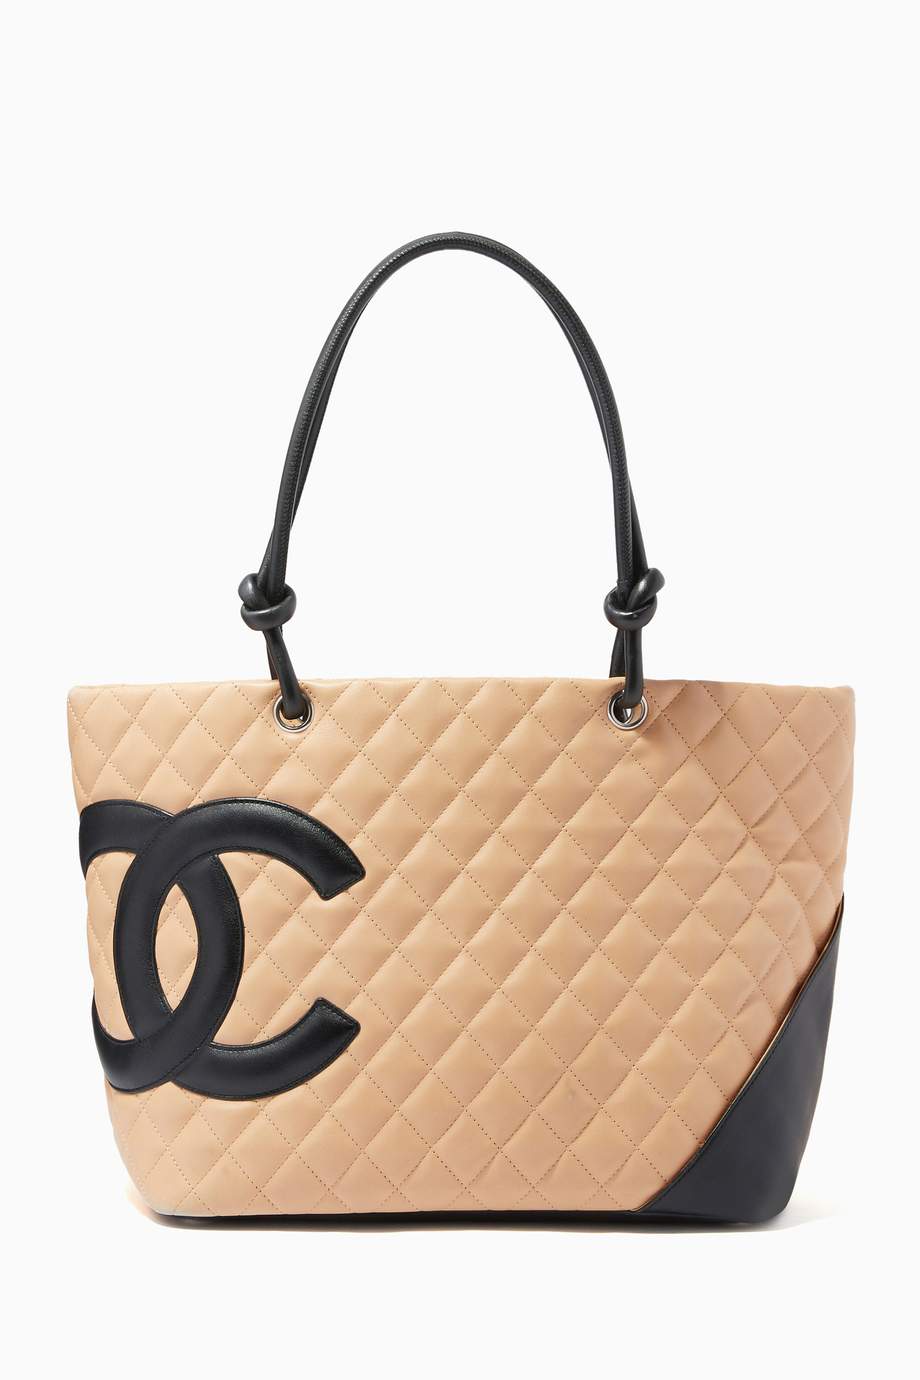 Shop Chanel Vintage Neutral Cambon Ligne Tote Bag in Quilted Calfskin for Women | Ounass UAE